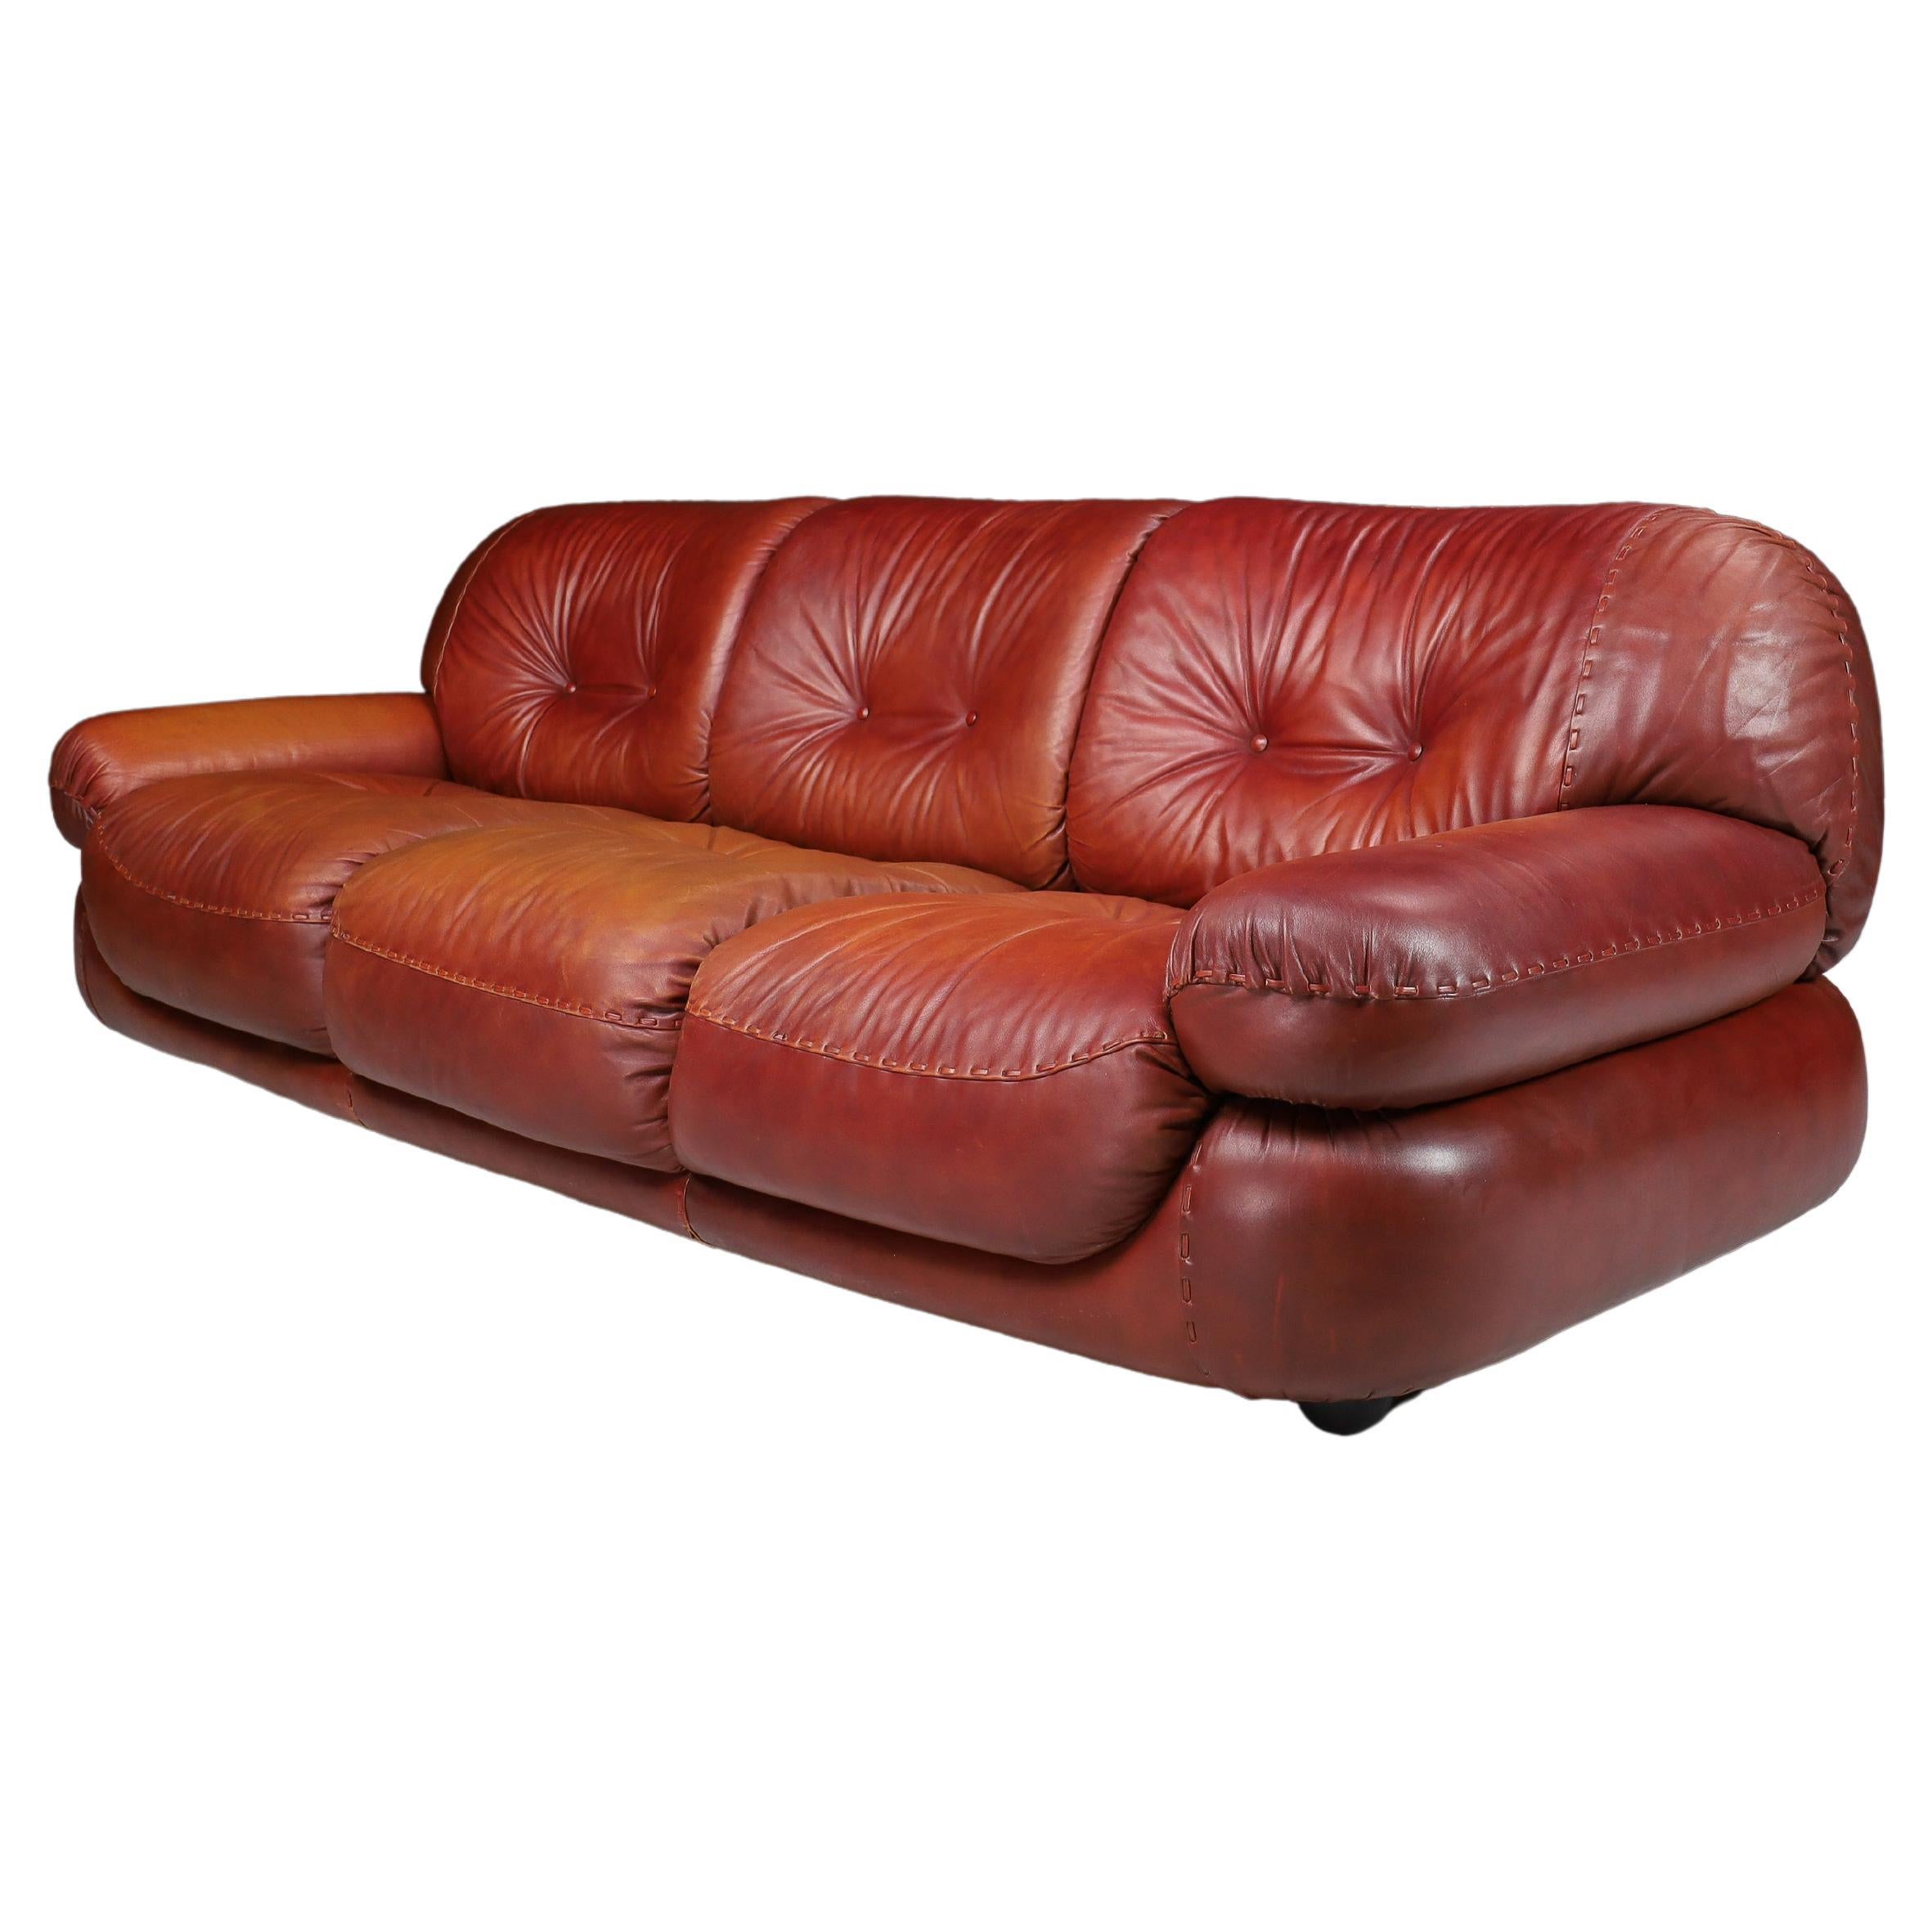 Large Lounge Sofa in Firebrick Leather by Sapporo for Mobil Girgi, Italy, 1970 For Sale